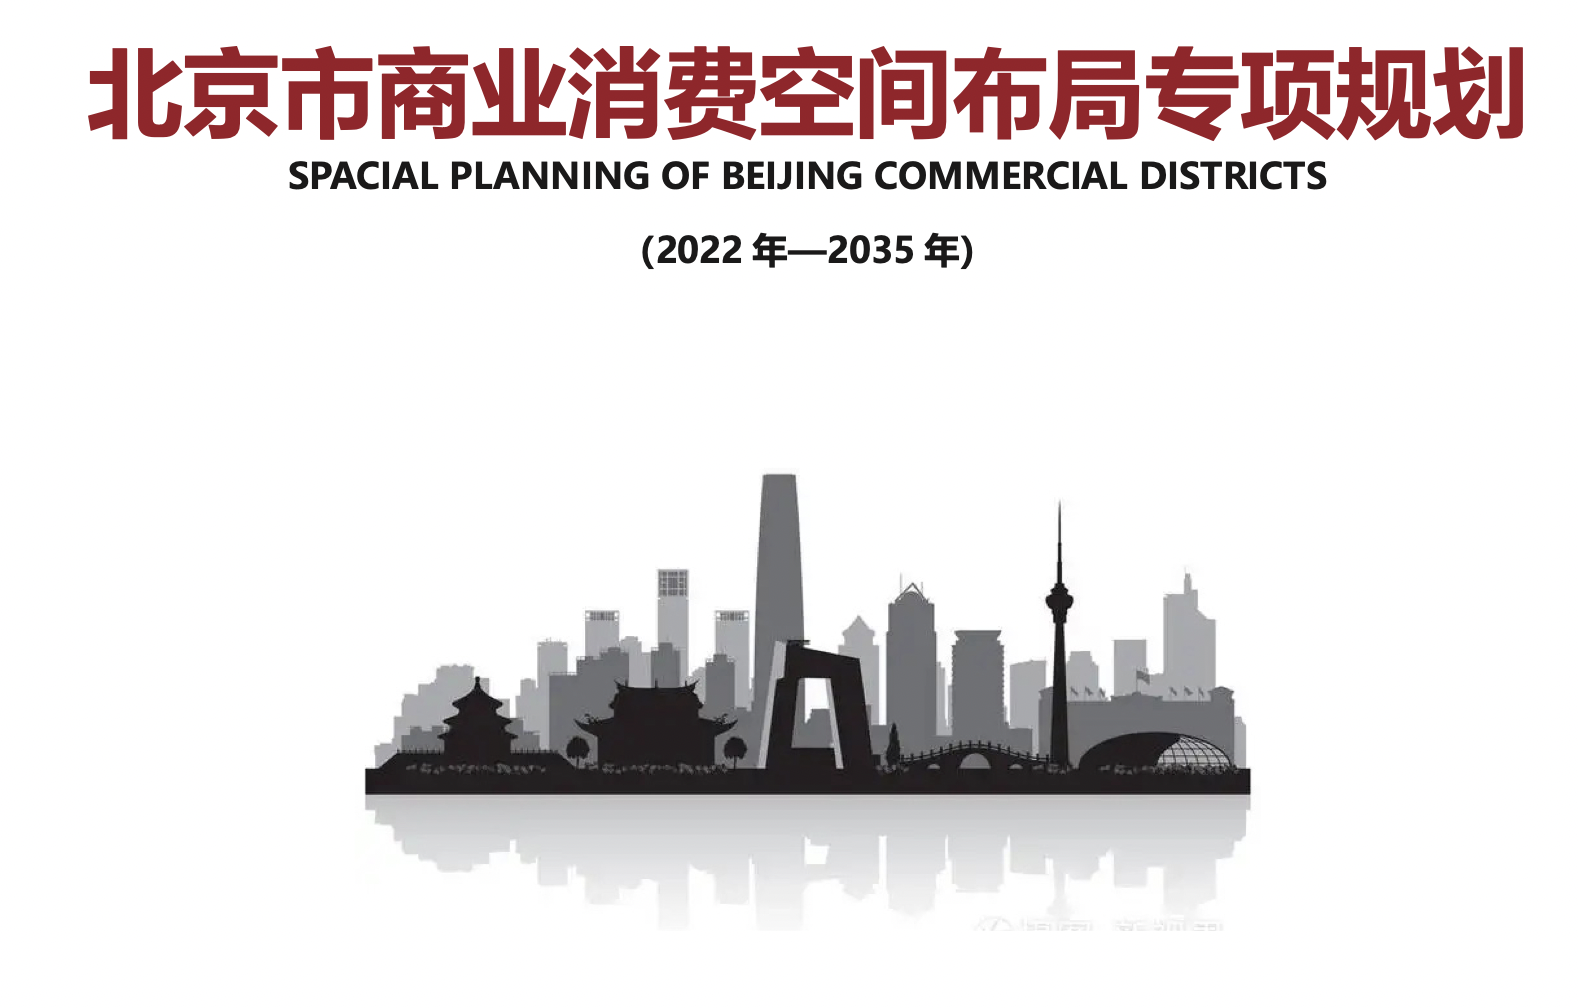 Beijing Launched the “Special Planning of Beijing Commercial Districts”